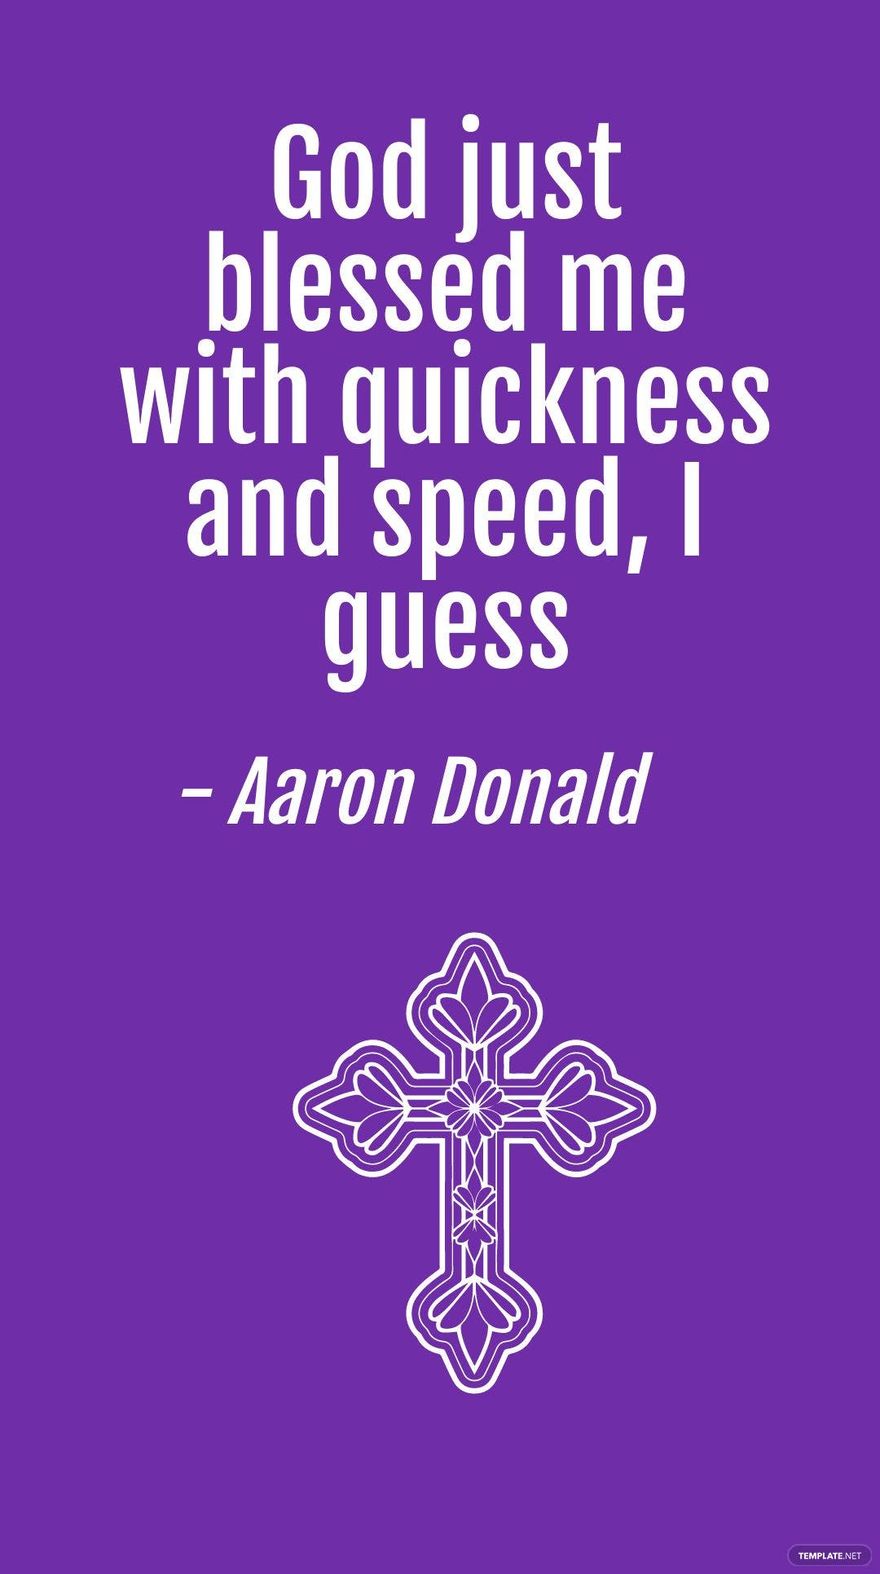 Aaron Donald - God just blessed me with quickness and speed, I guess